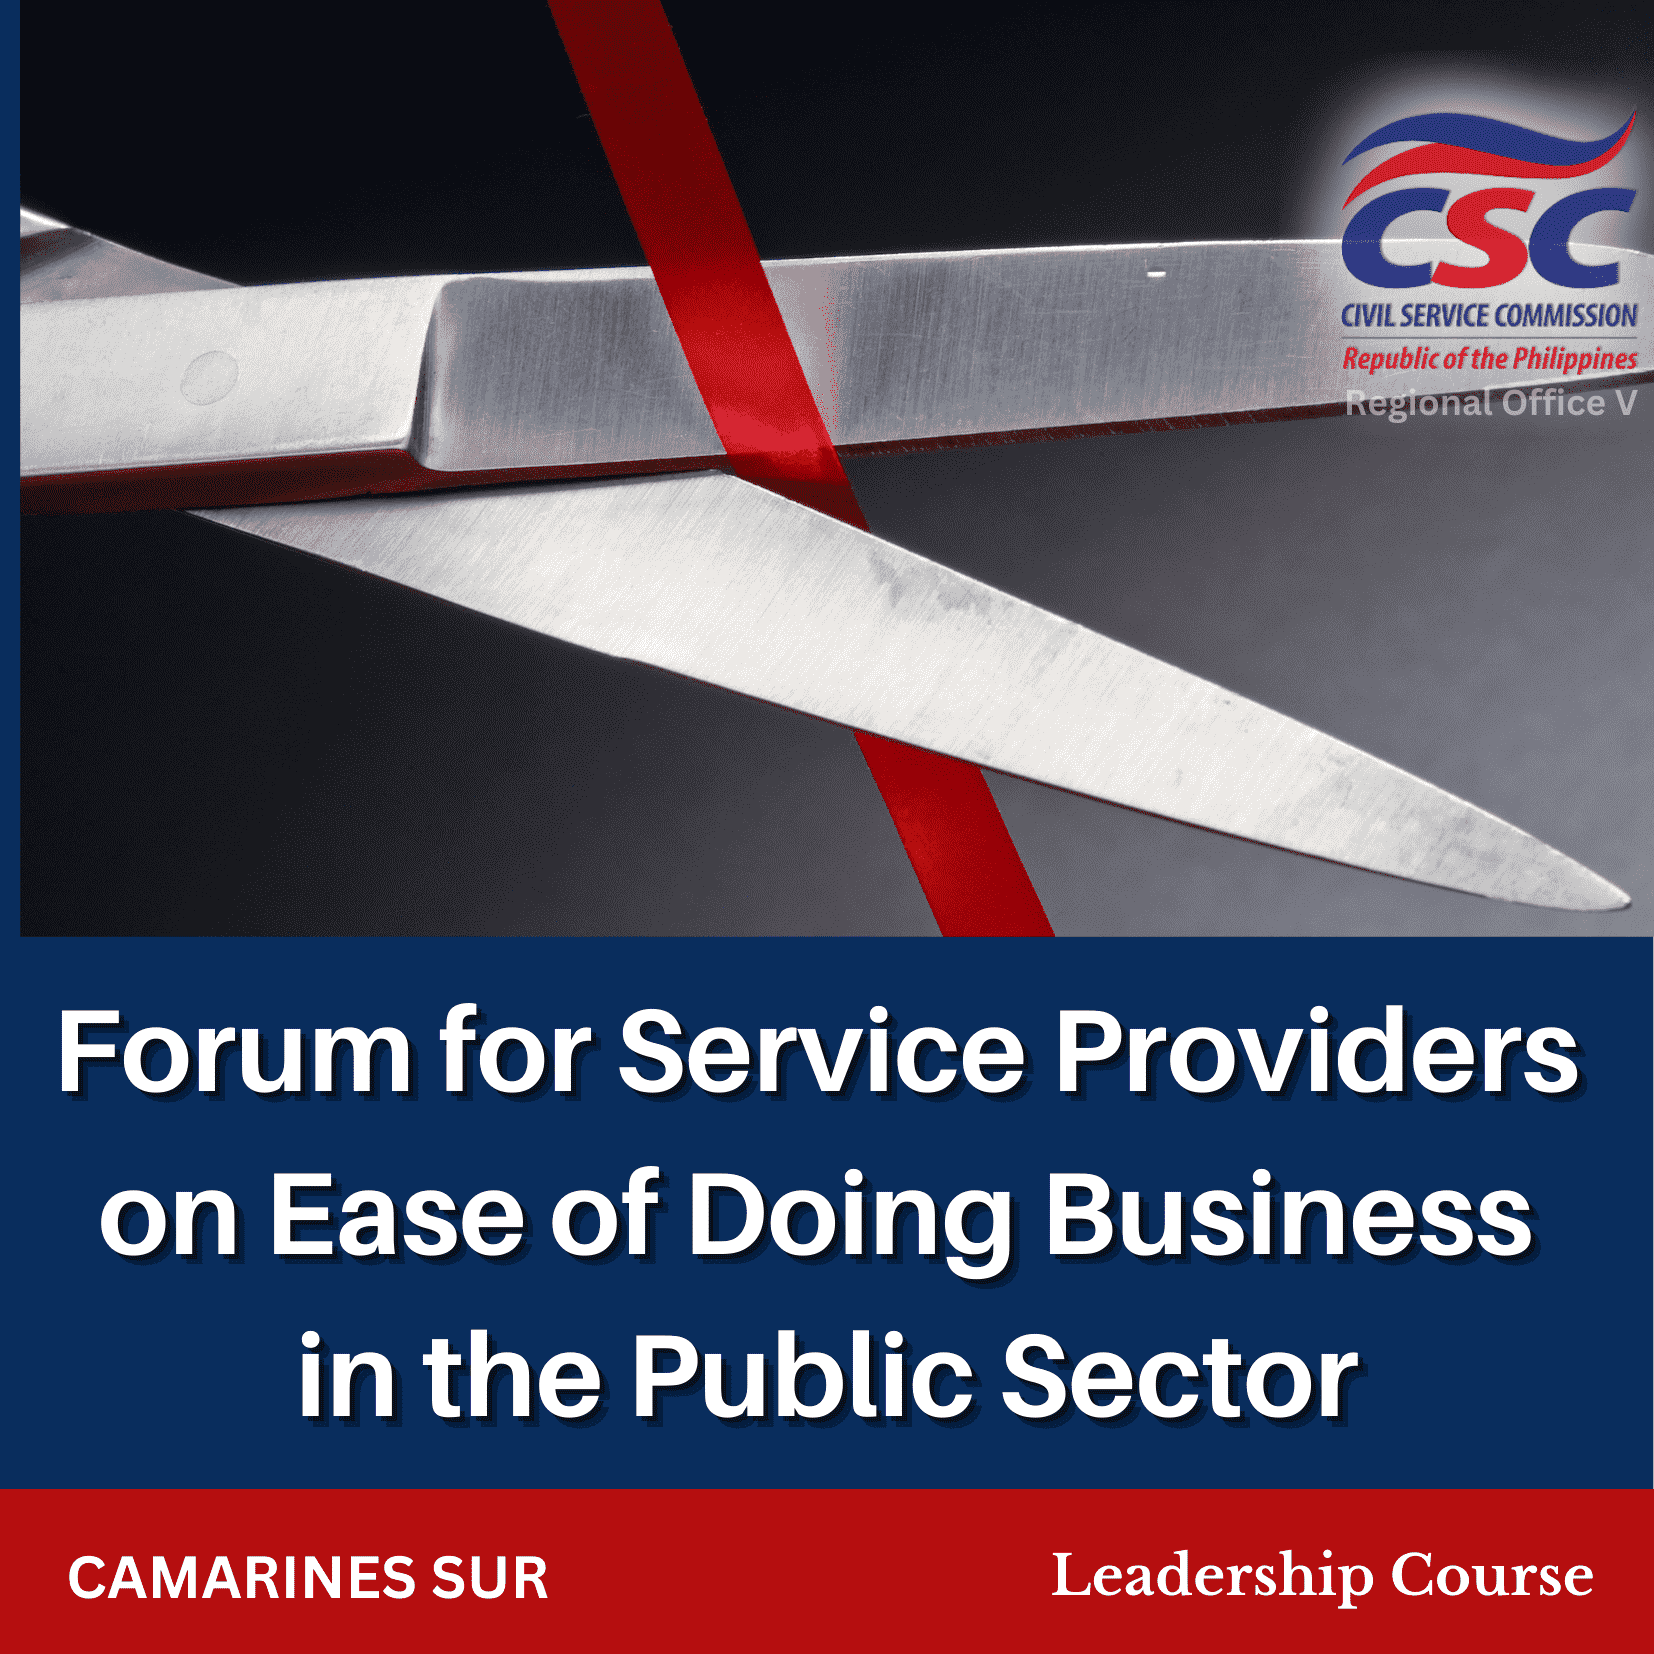 Ease of Doing Business in the Public Sector for Service Providers (Camarines Sur)